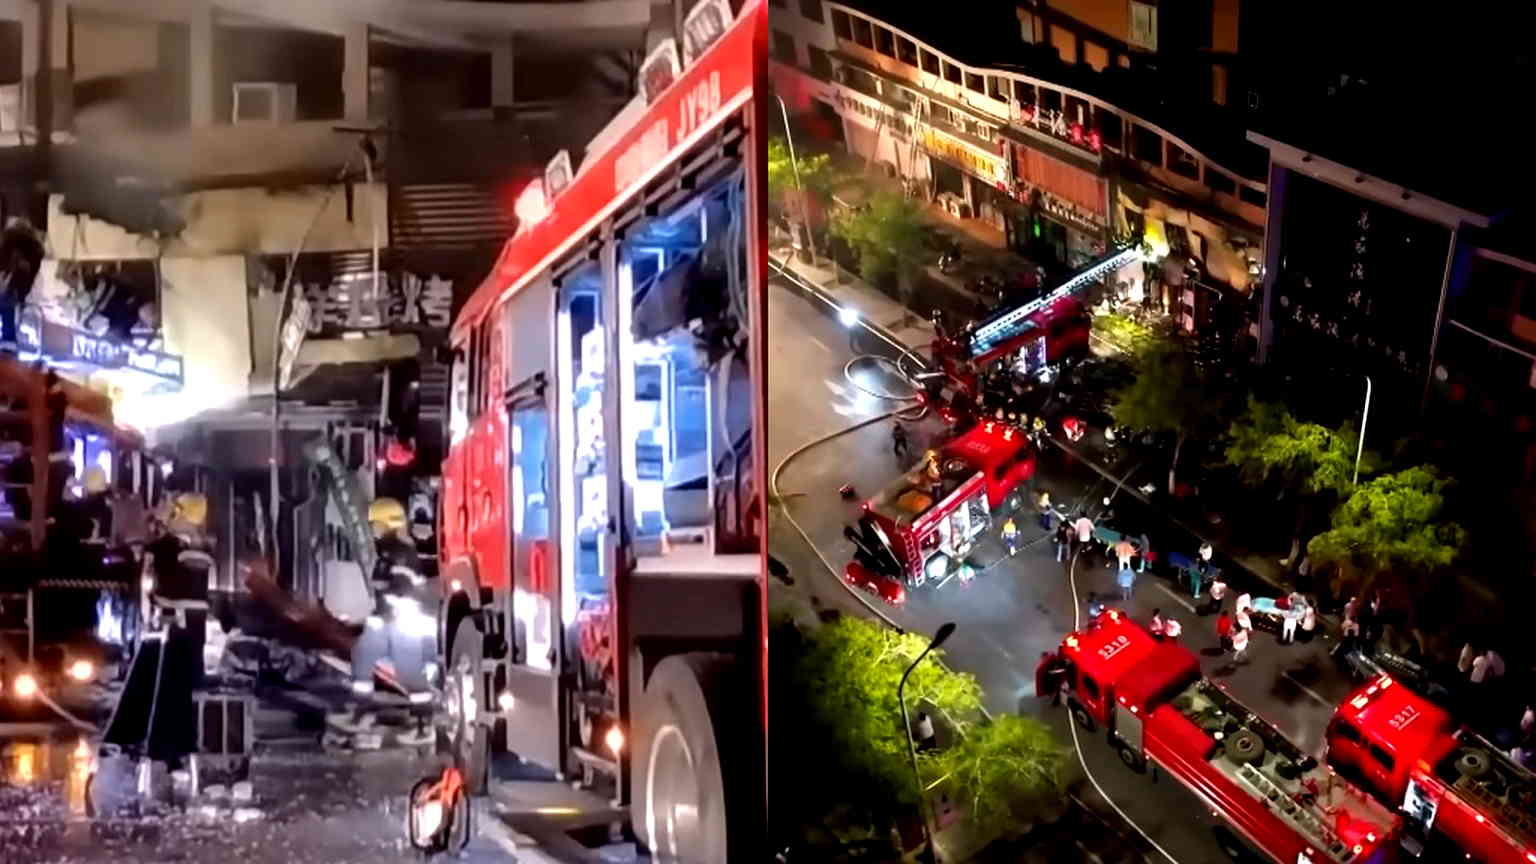 BBQ restaurant explosion in China kills 31, prompts national safety campaigns